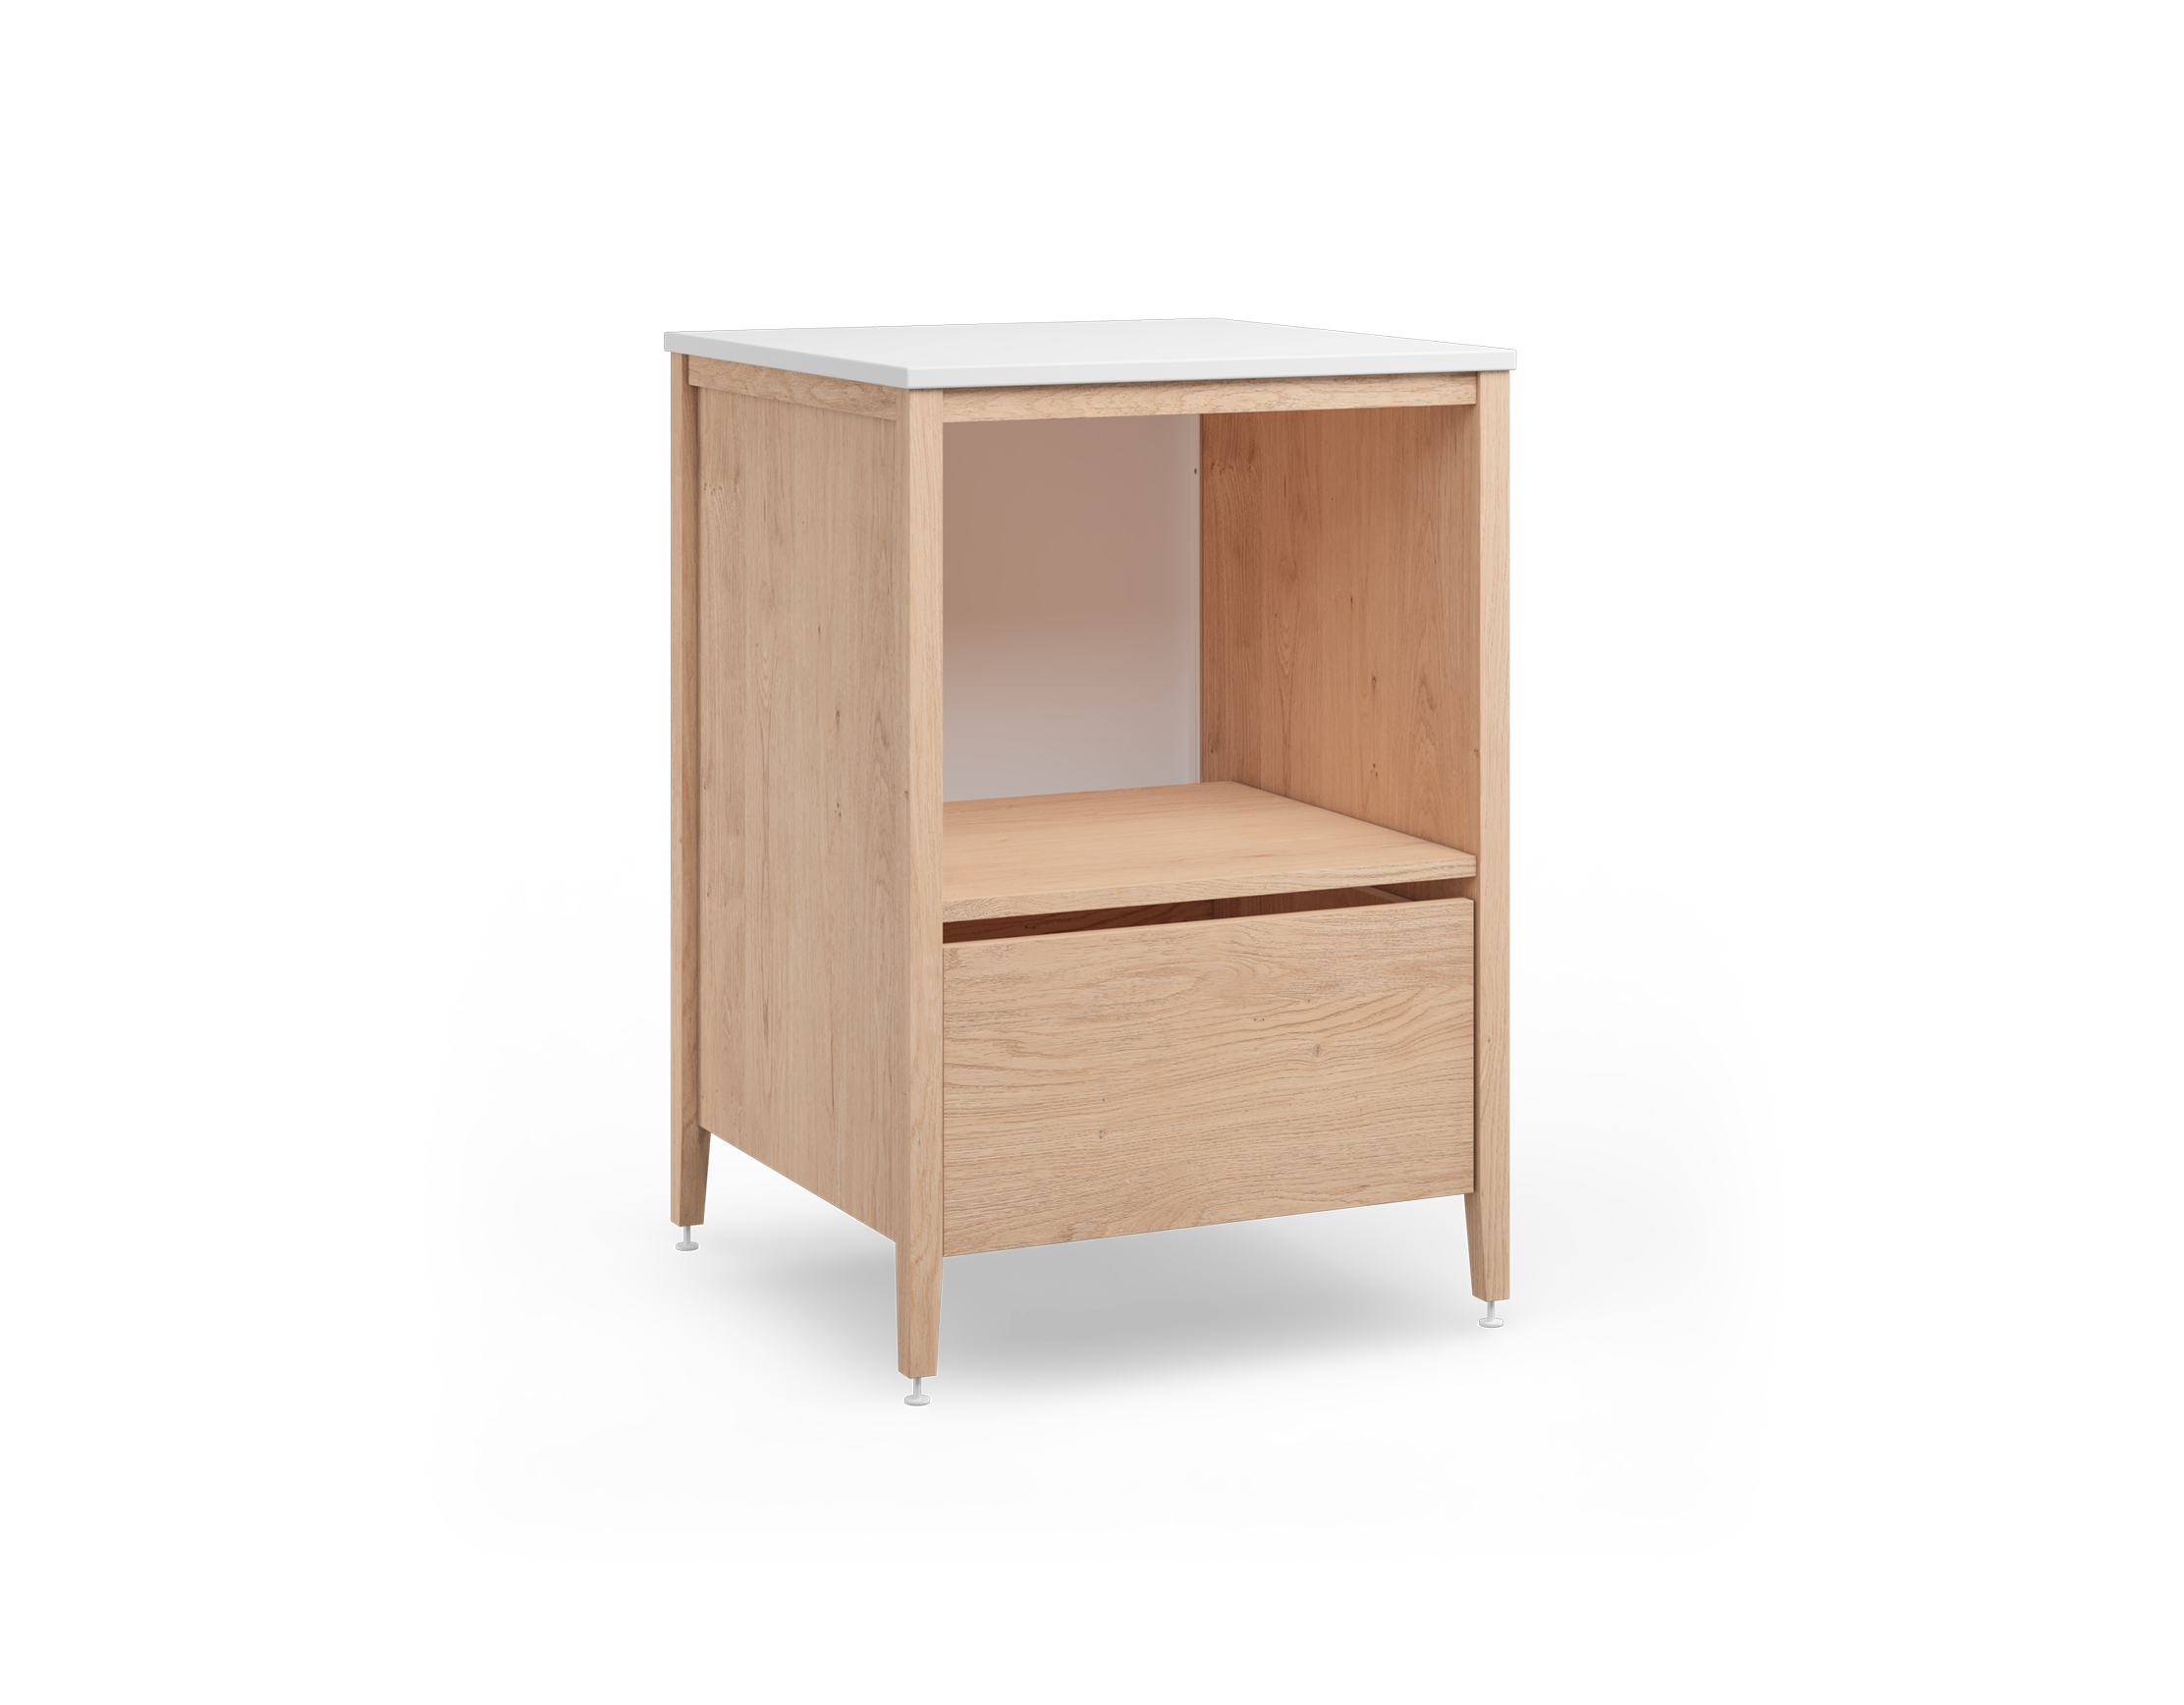 Coquo modular kitchen microwave cabinet with bottom drawer in natural oak. 